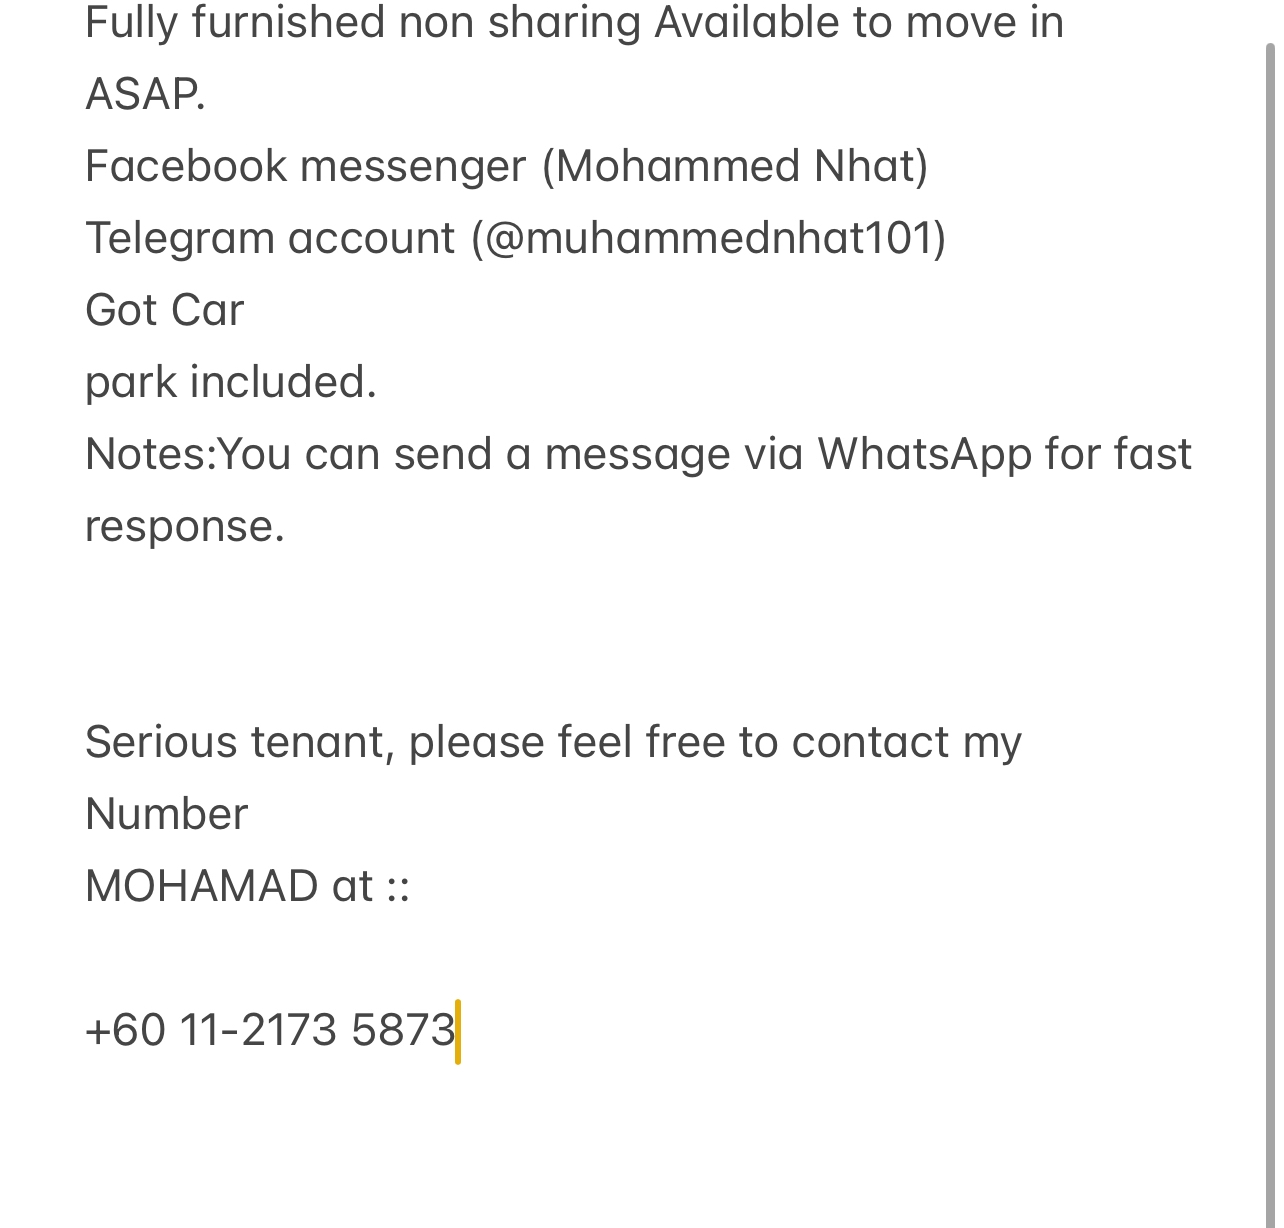 room for rent, single room, jalan okk mahali, Send the owner a message on WhatsApp/facebook if you want to RENT the unit facebook (Mohammed Nhat)&Telegram(@muhammednhat101) Fully furnished non sharing :(comfortable)